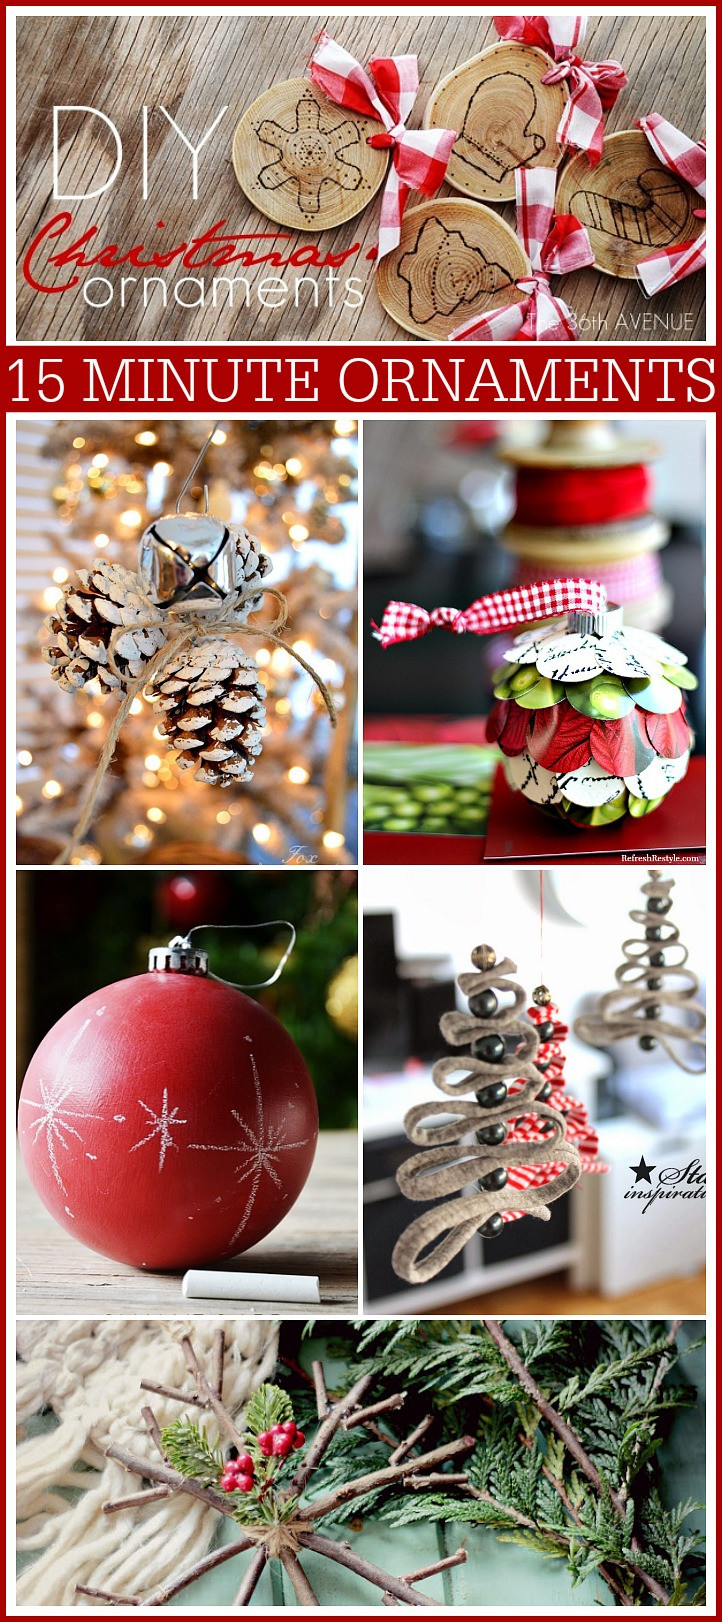 DIY Christmas Ornaments
 The 36th AVENUE 15 Minute DIY Christmas Ornaments